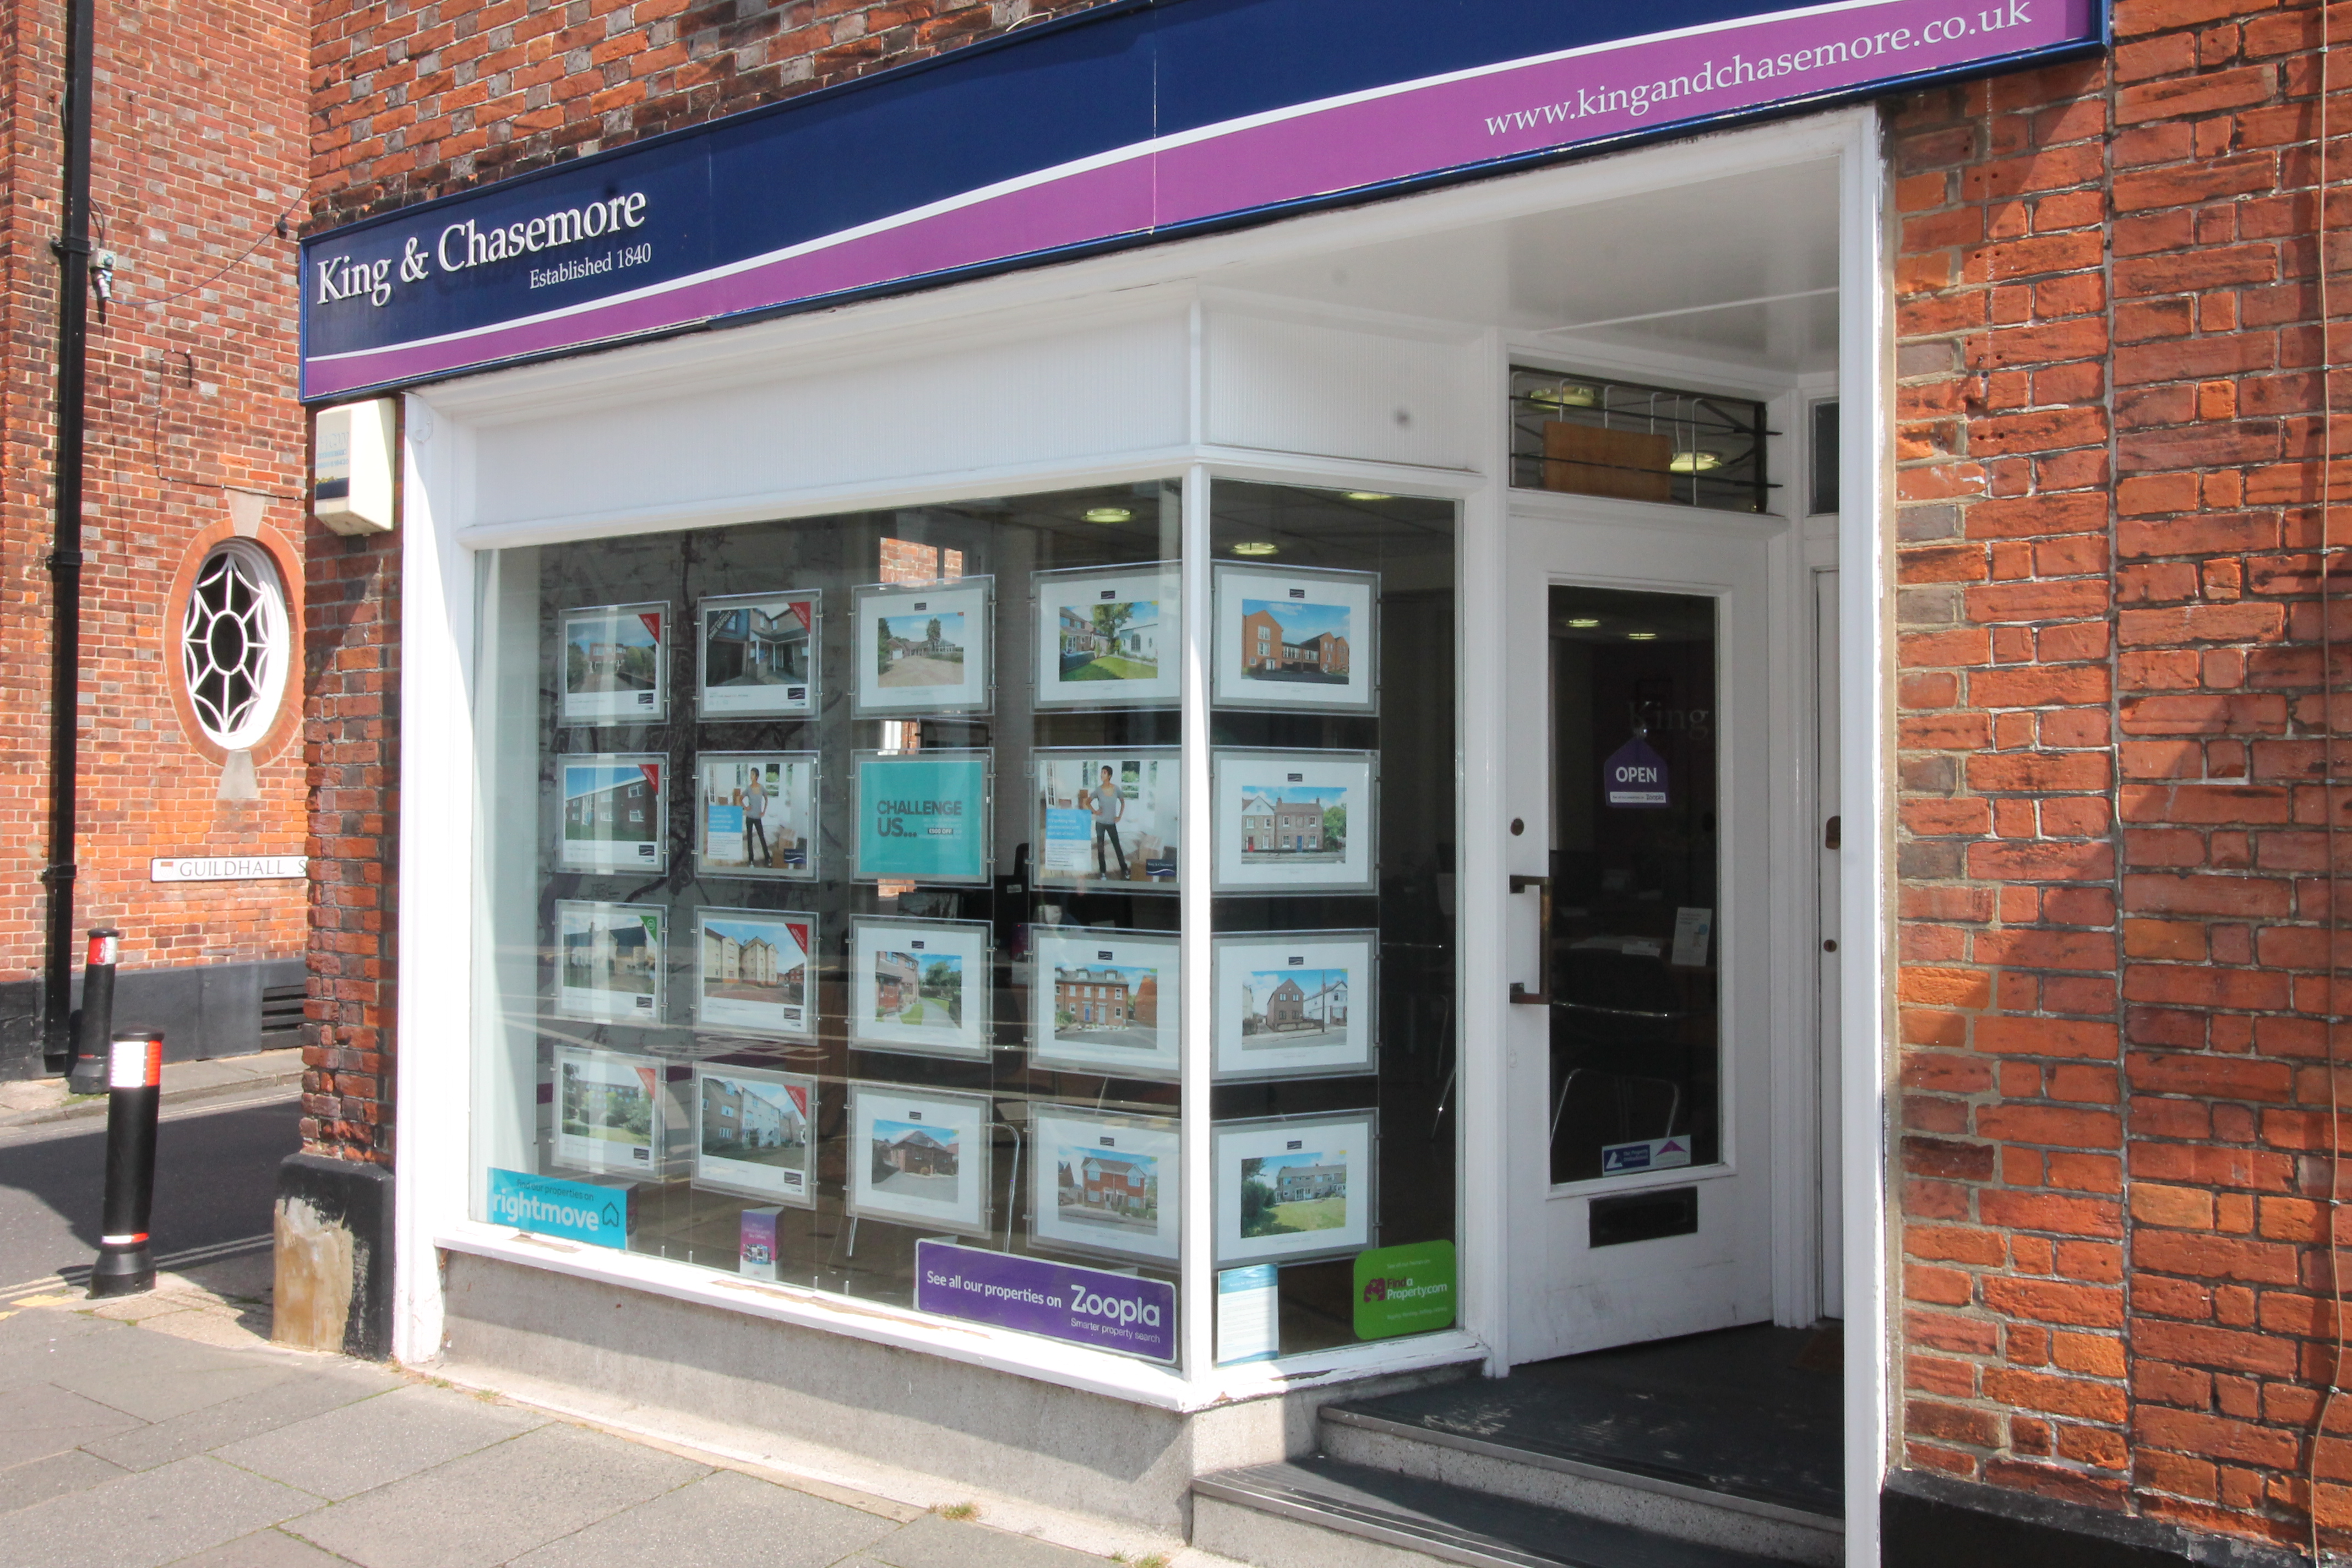 King & Chasemore Sales and Letting Agents Chichester Chichester 01243 630261